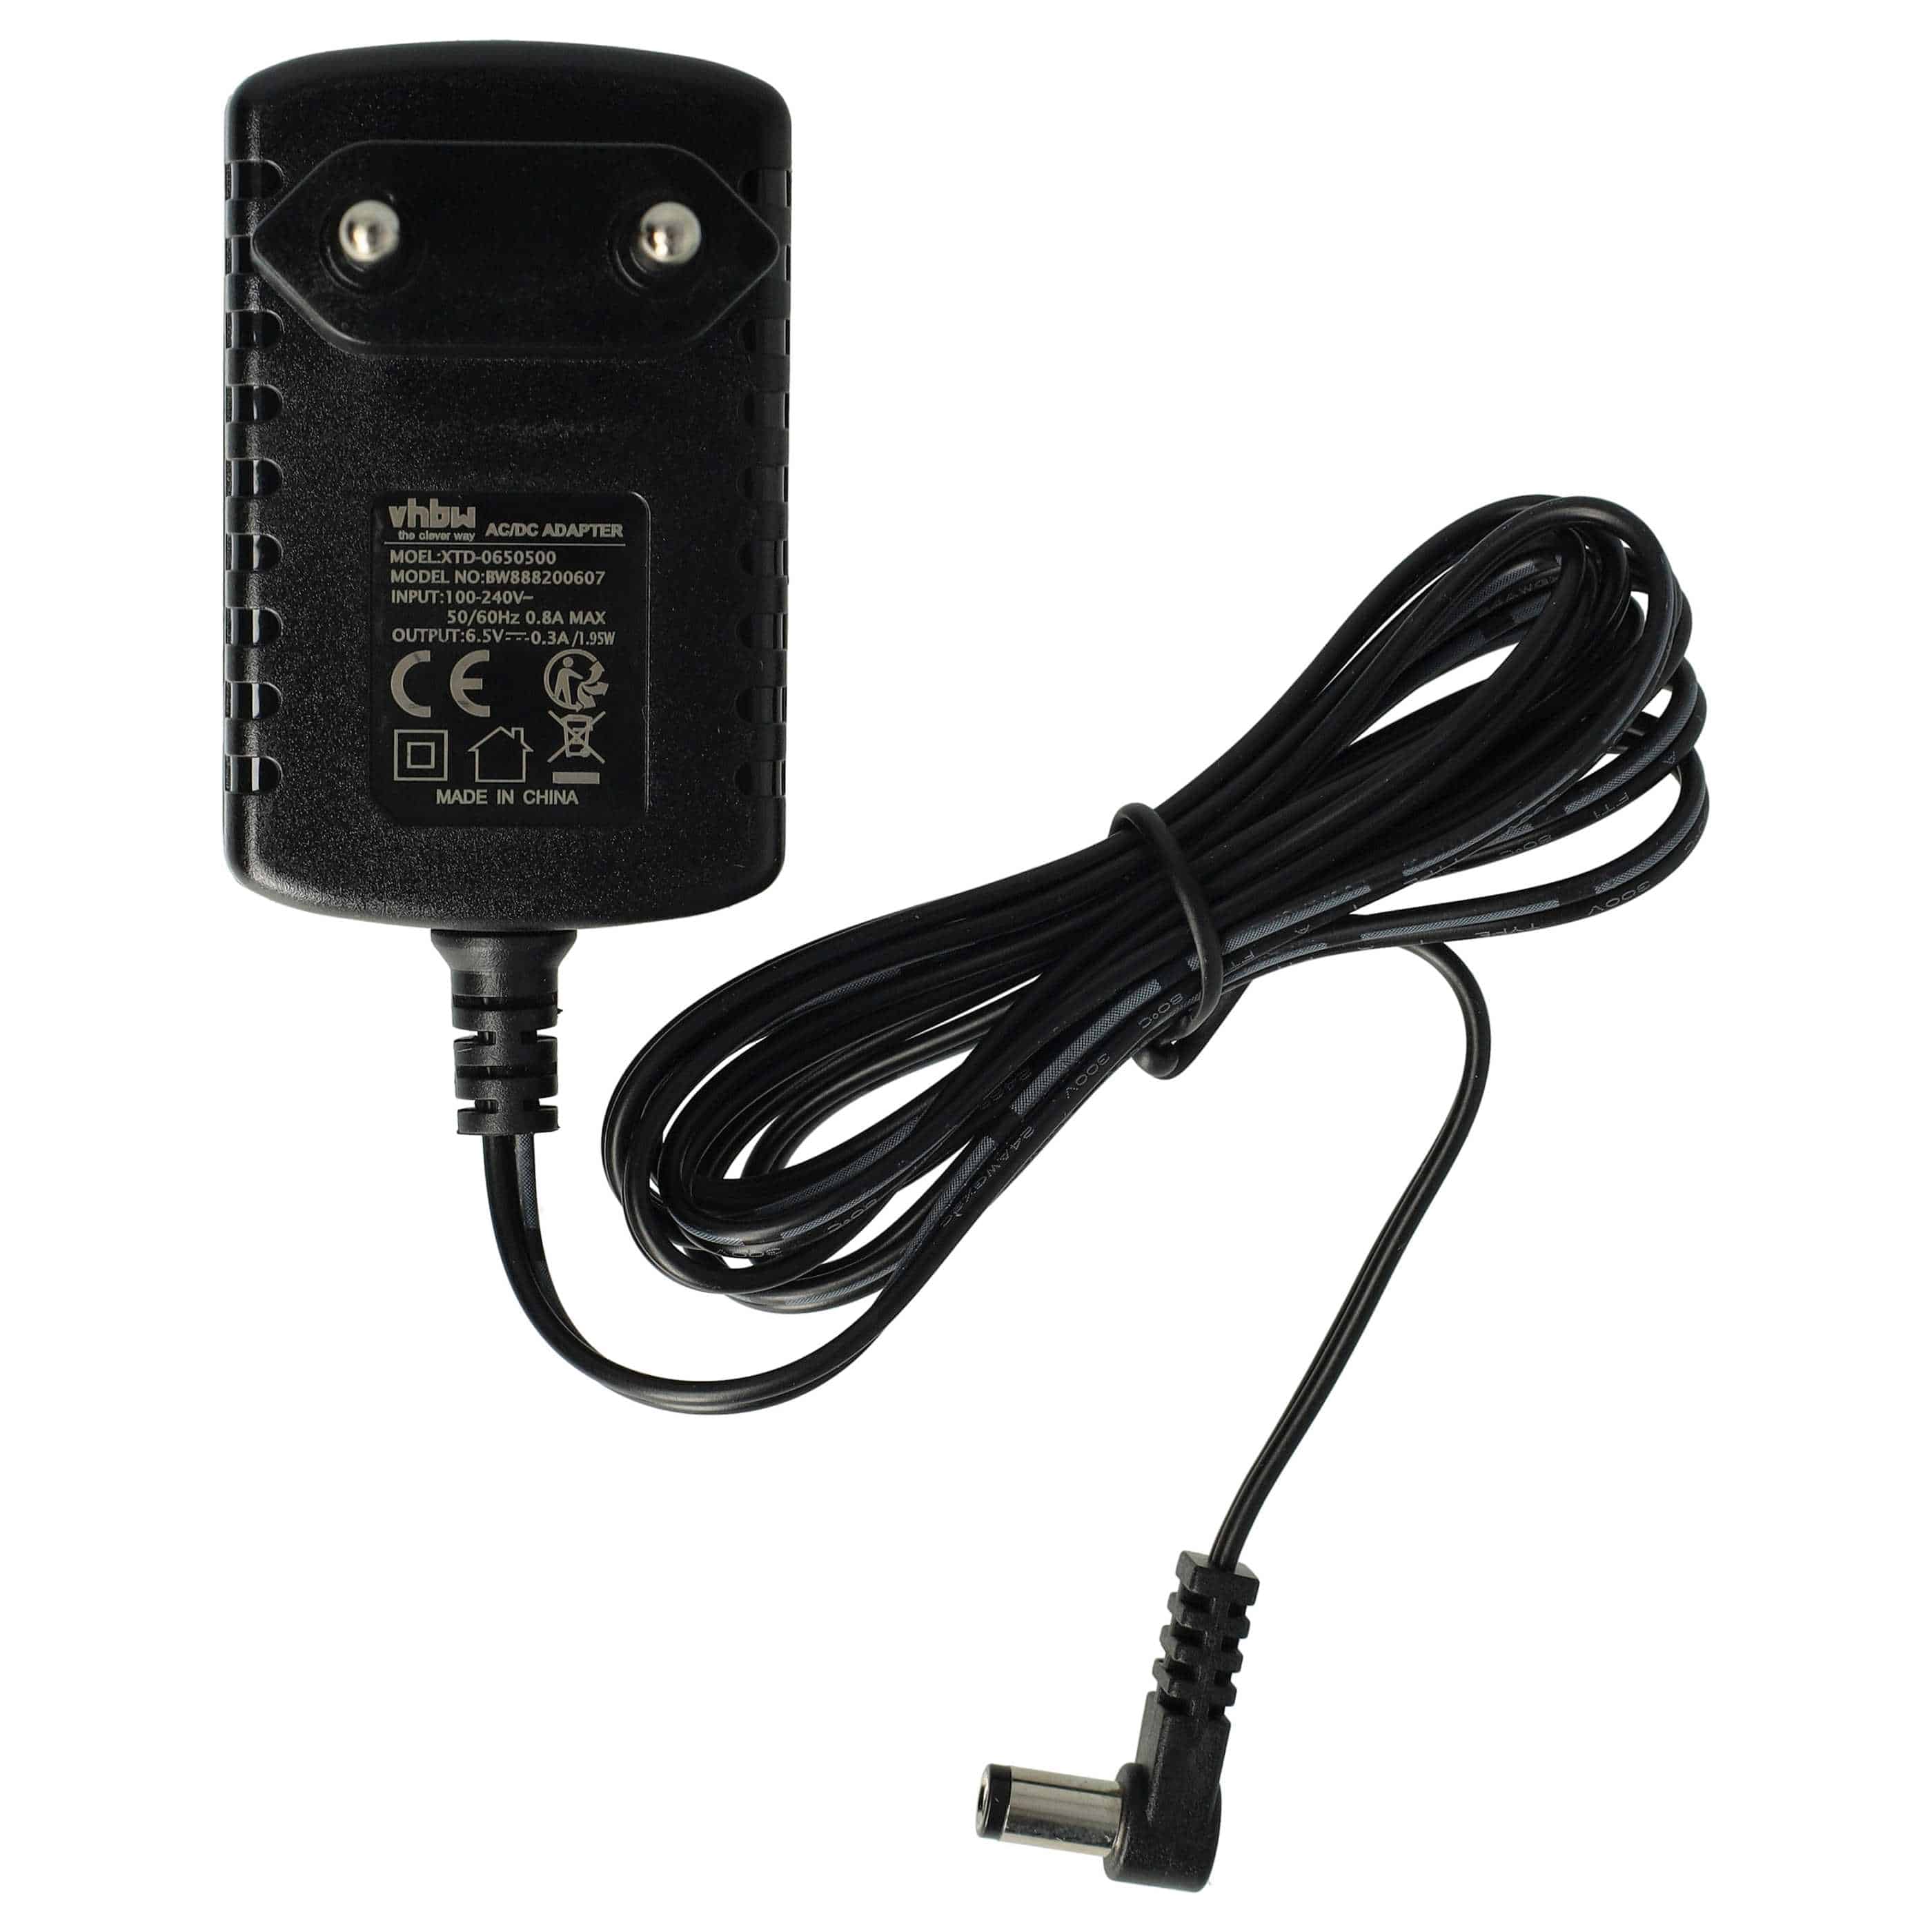 Mains Power Adapter replaces Gigaset C39280-Z4-C769 for Landline Telephone Charging Station